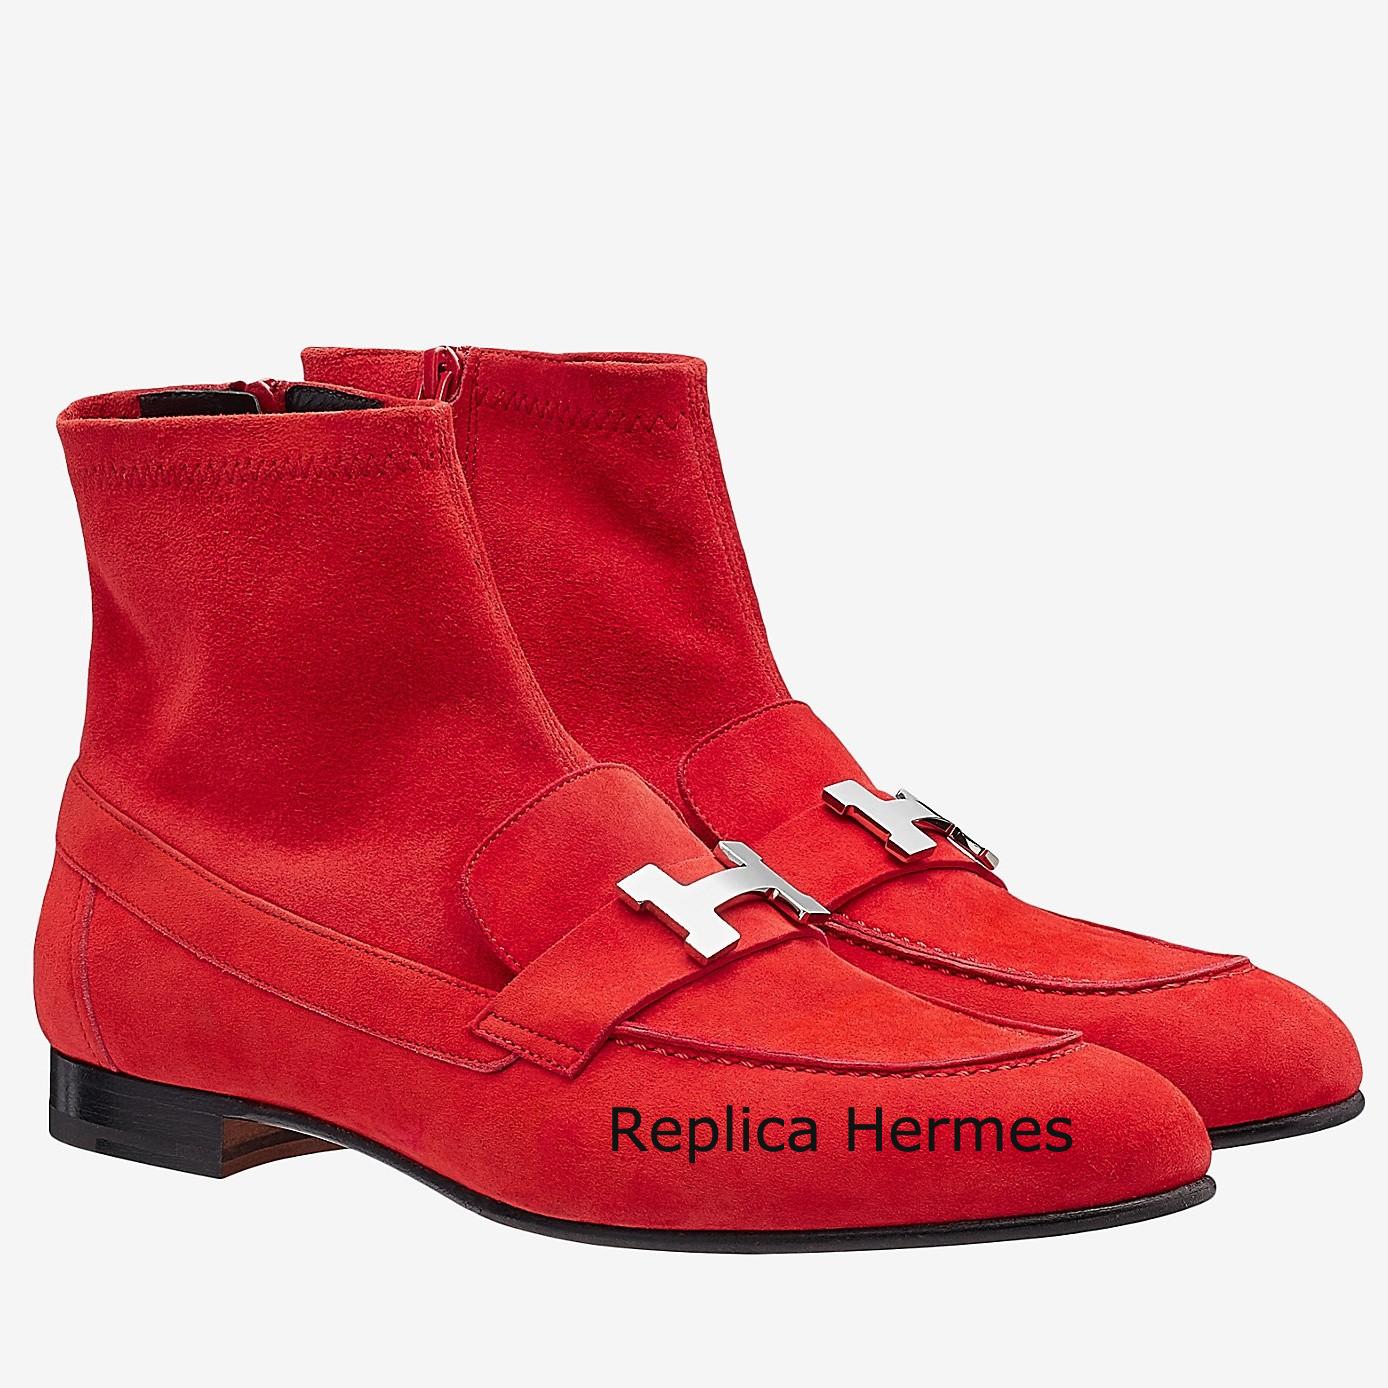 Imitation Designer Hermes Red Saint Honore Ankle Boots